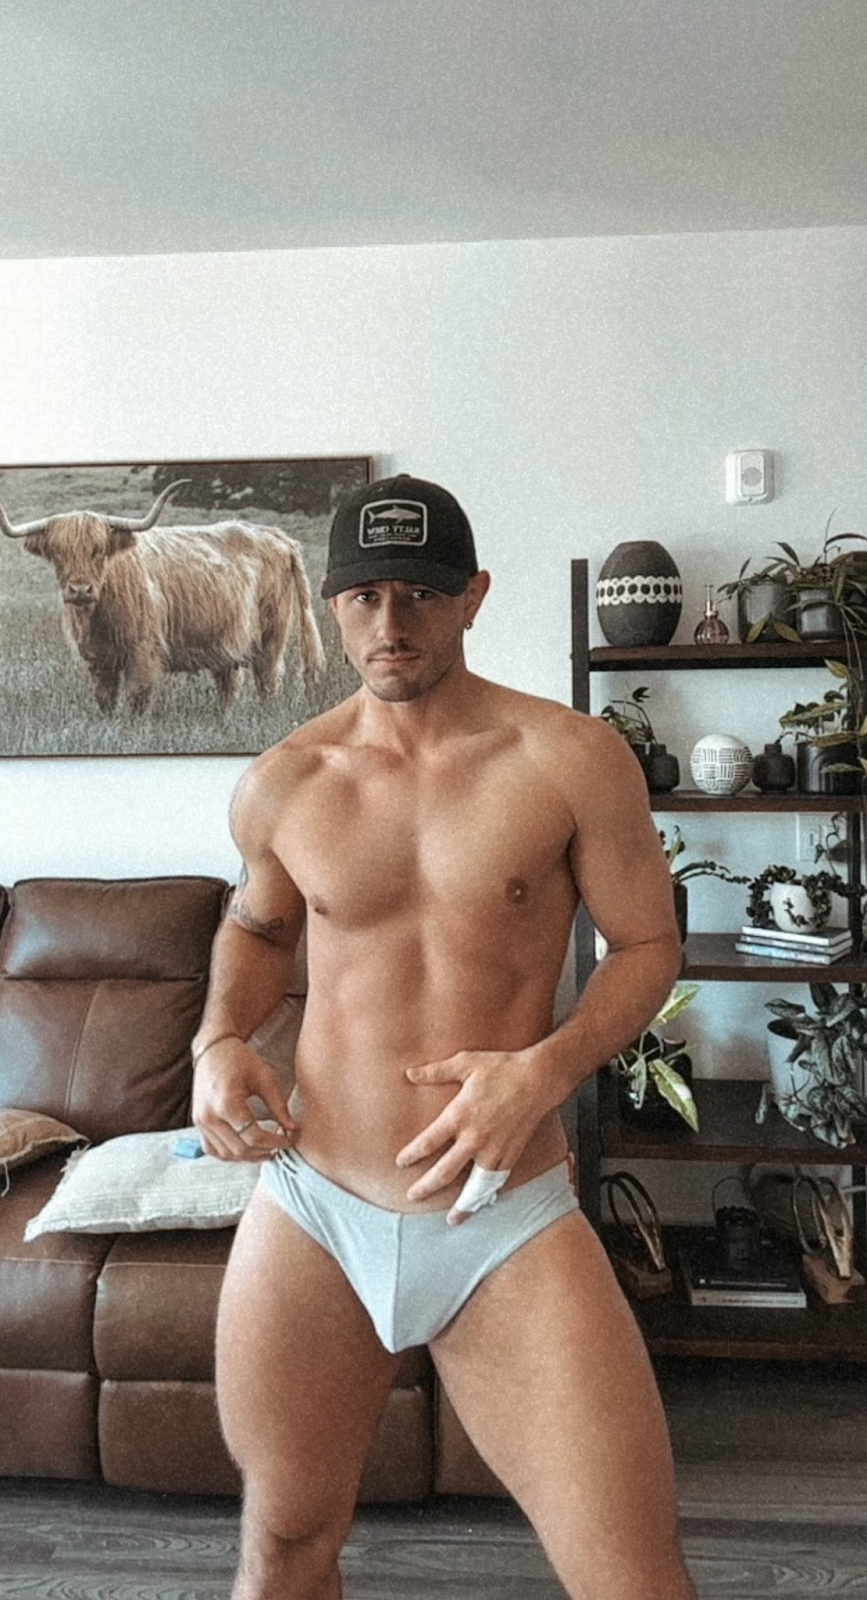 Ryder Owens standing in his grey briefs in his living room wearing a fishing baseball hat and smirking for his onlyfans followers